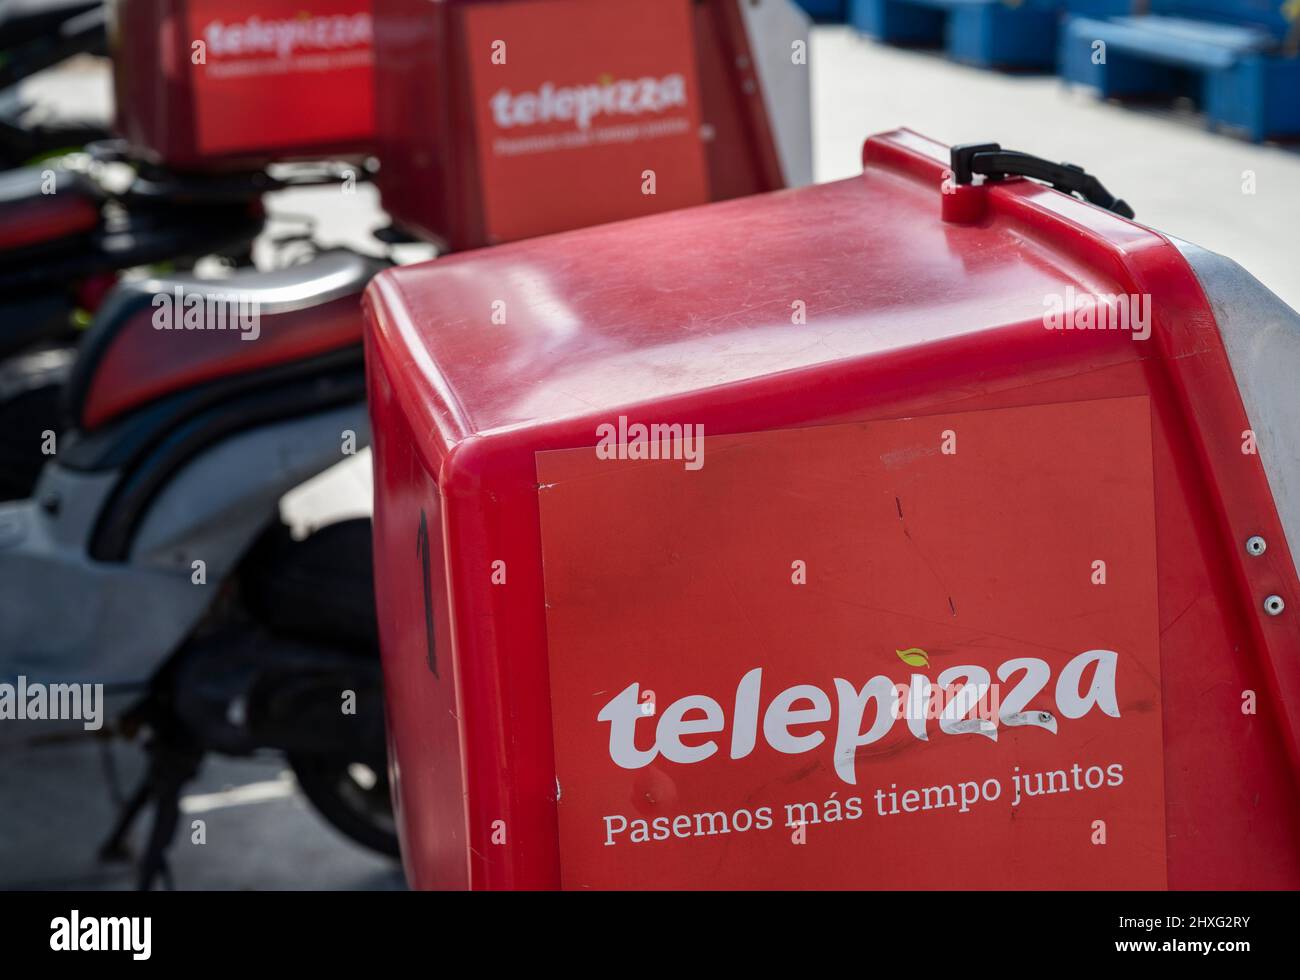 Spanish fast-food restaurant chain of Telepizza delivery motorcycles seen parked on the street in Spain. Stock Photo